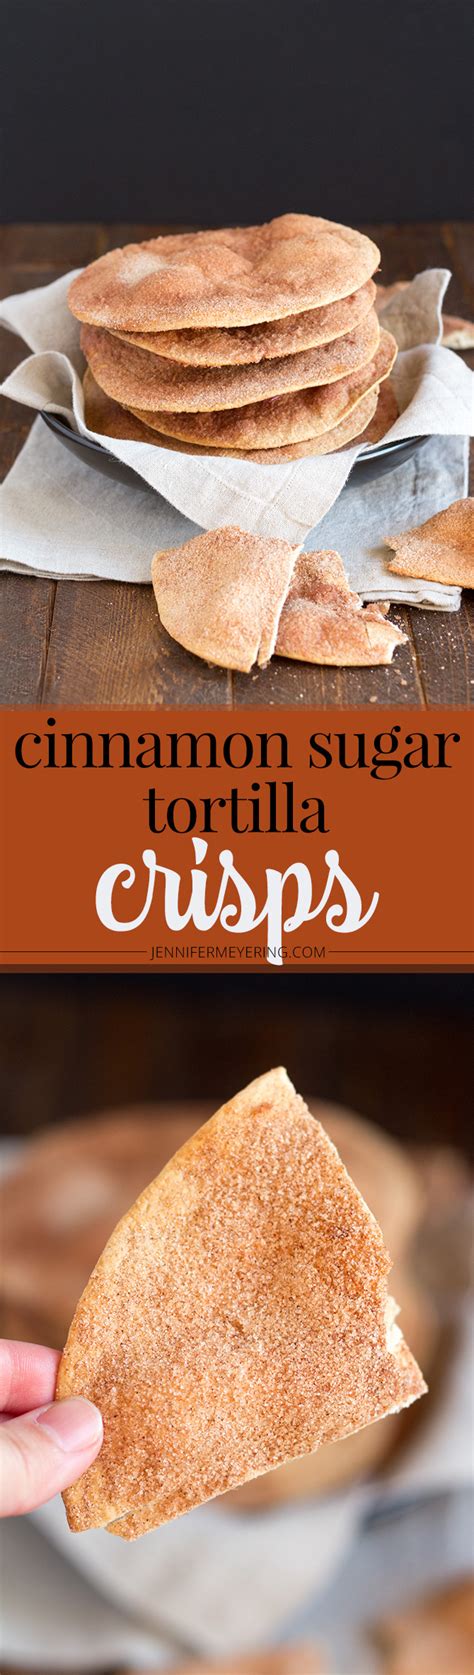 If you sprinkle when it's cold, the cinnamon and sugar will not stick to the fritter as easily. Cinnamon Sugar Tortilla Crisps - JenniferMeyering.com ...